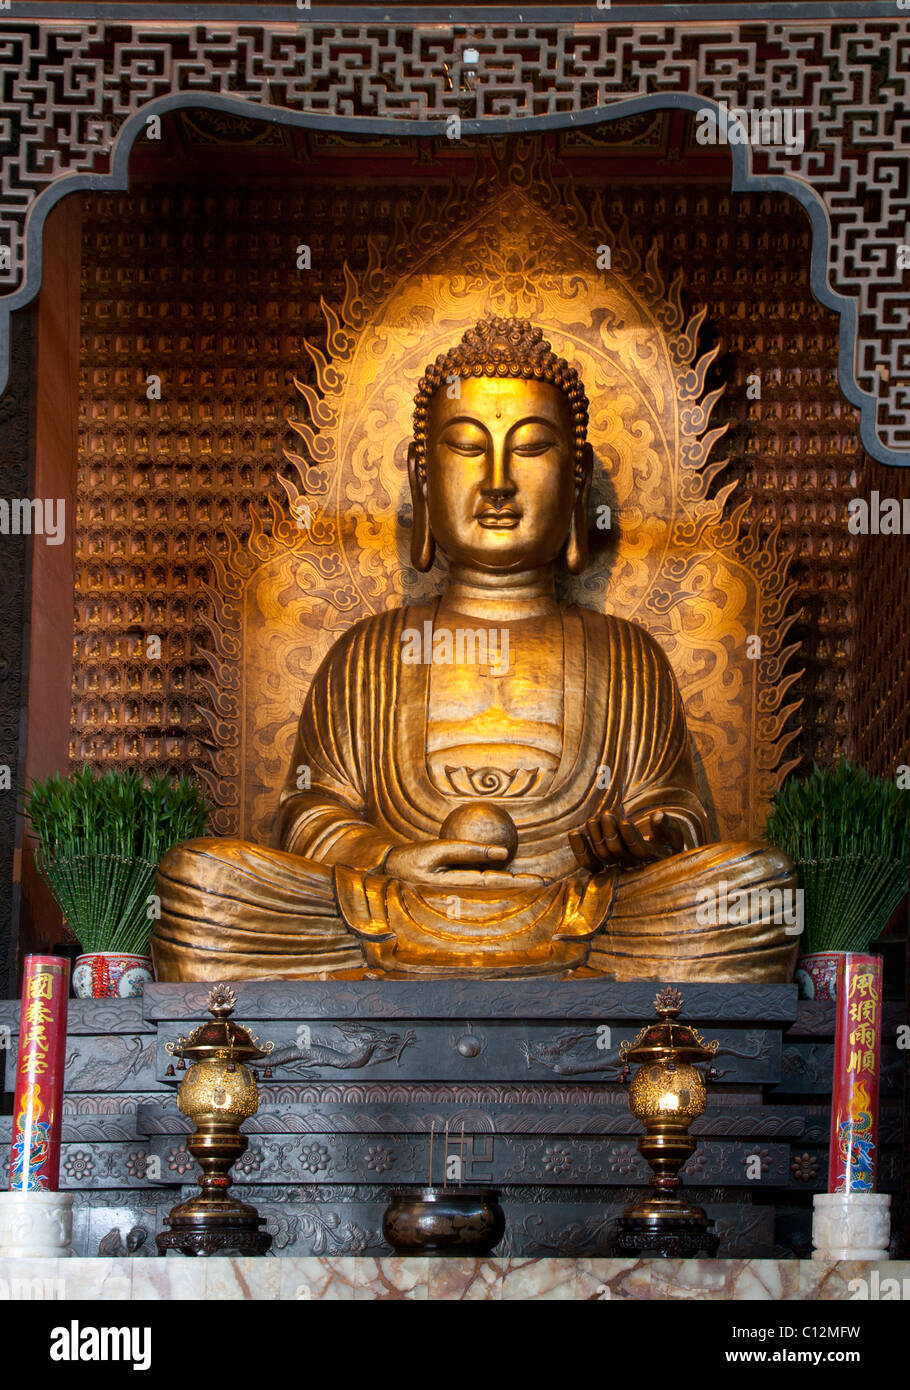 Grand Buddha statue in Temple Fo Guang Shan Banque D'Images